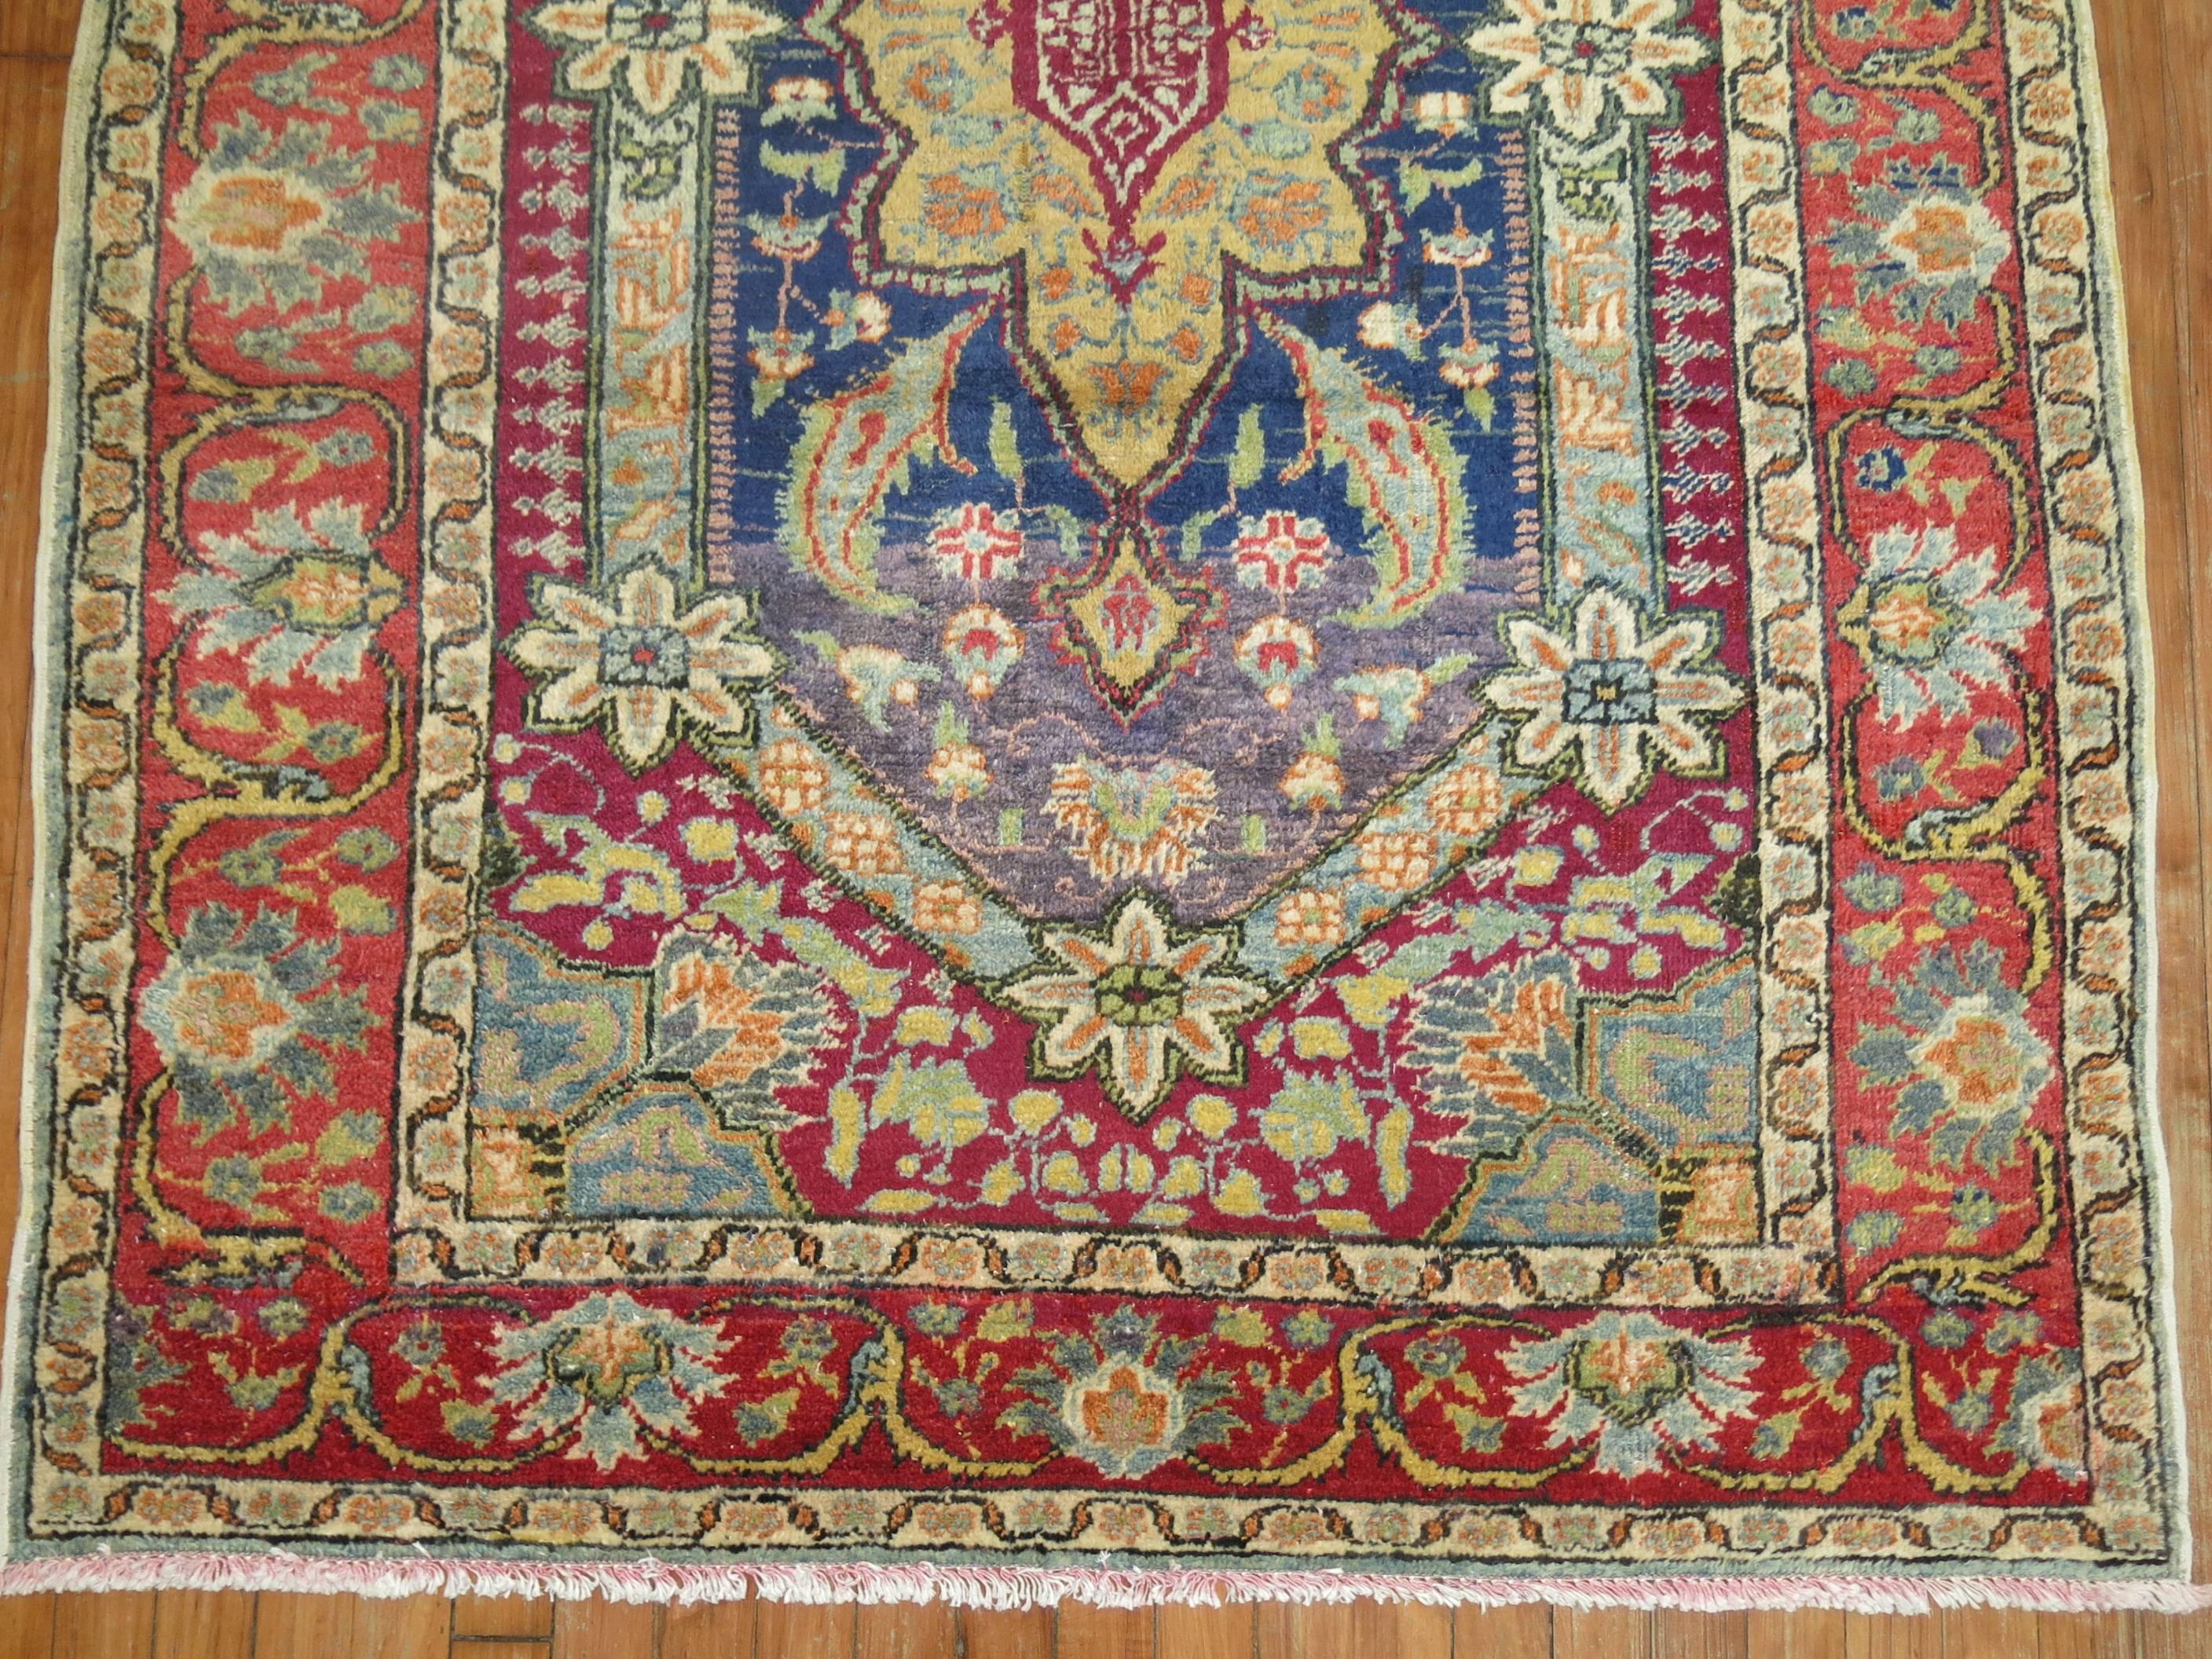 A vintage Turkish Kula Carpet. Predominant accents in blue, red, purple and green.